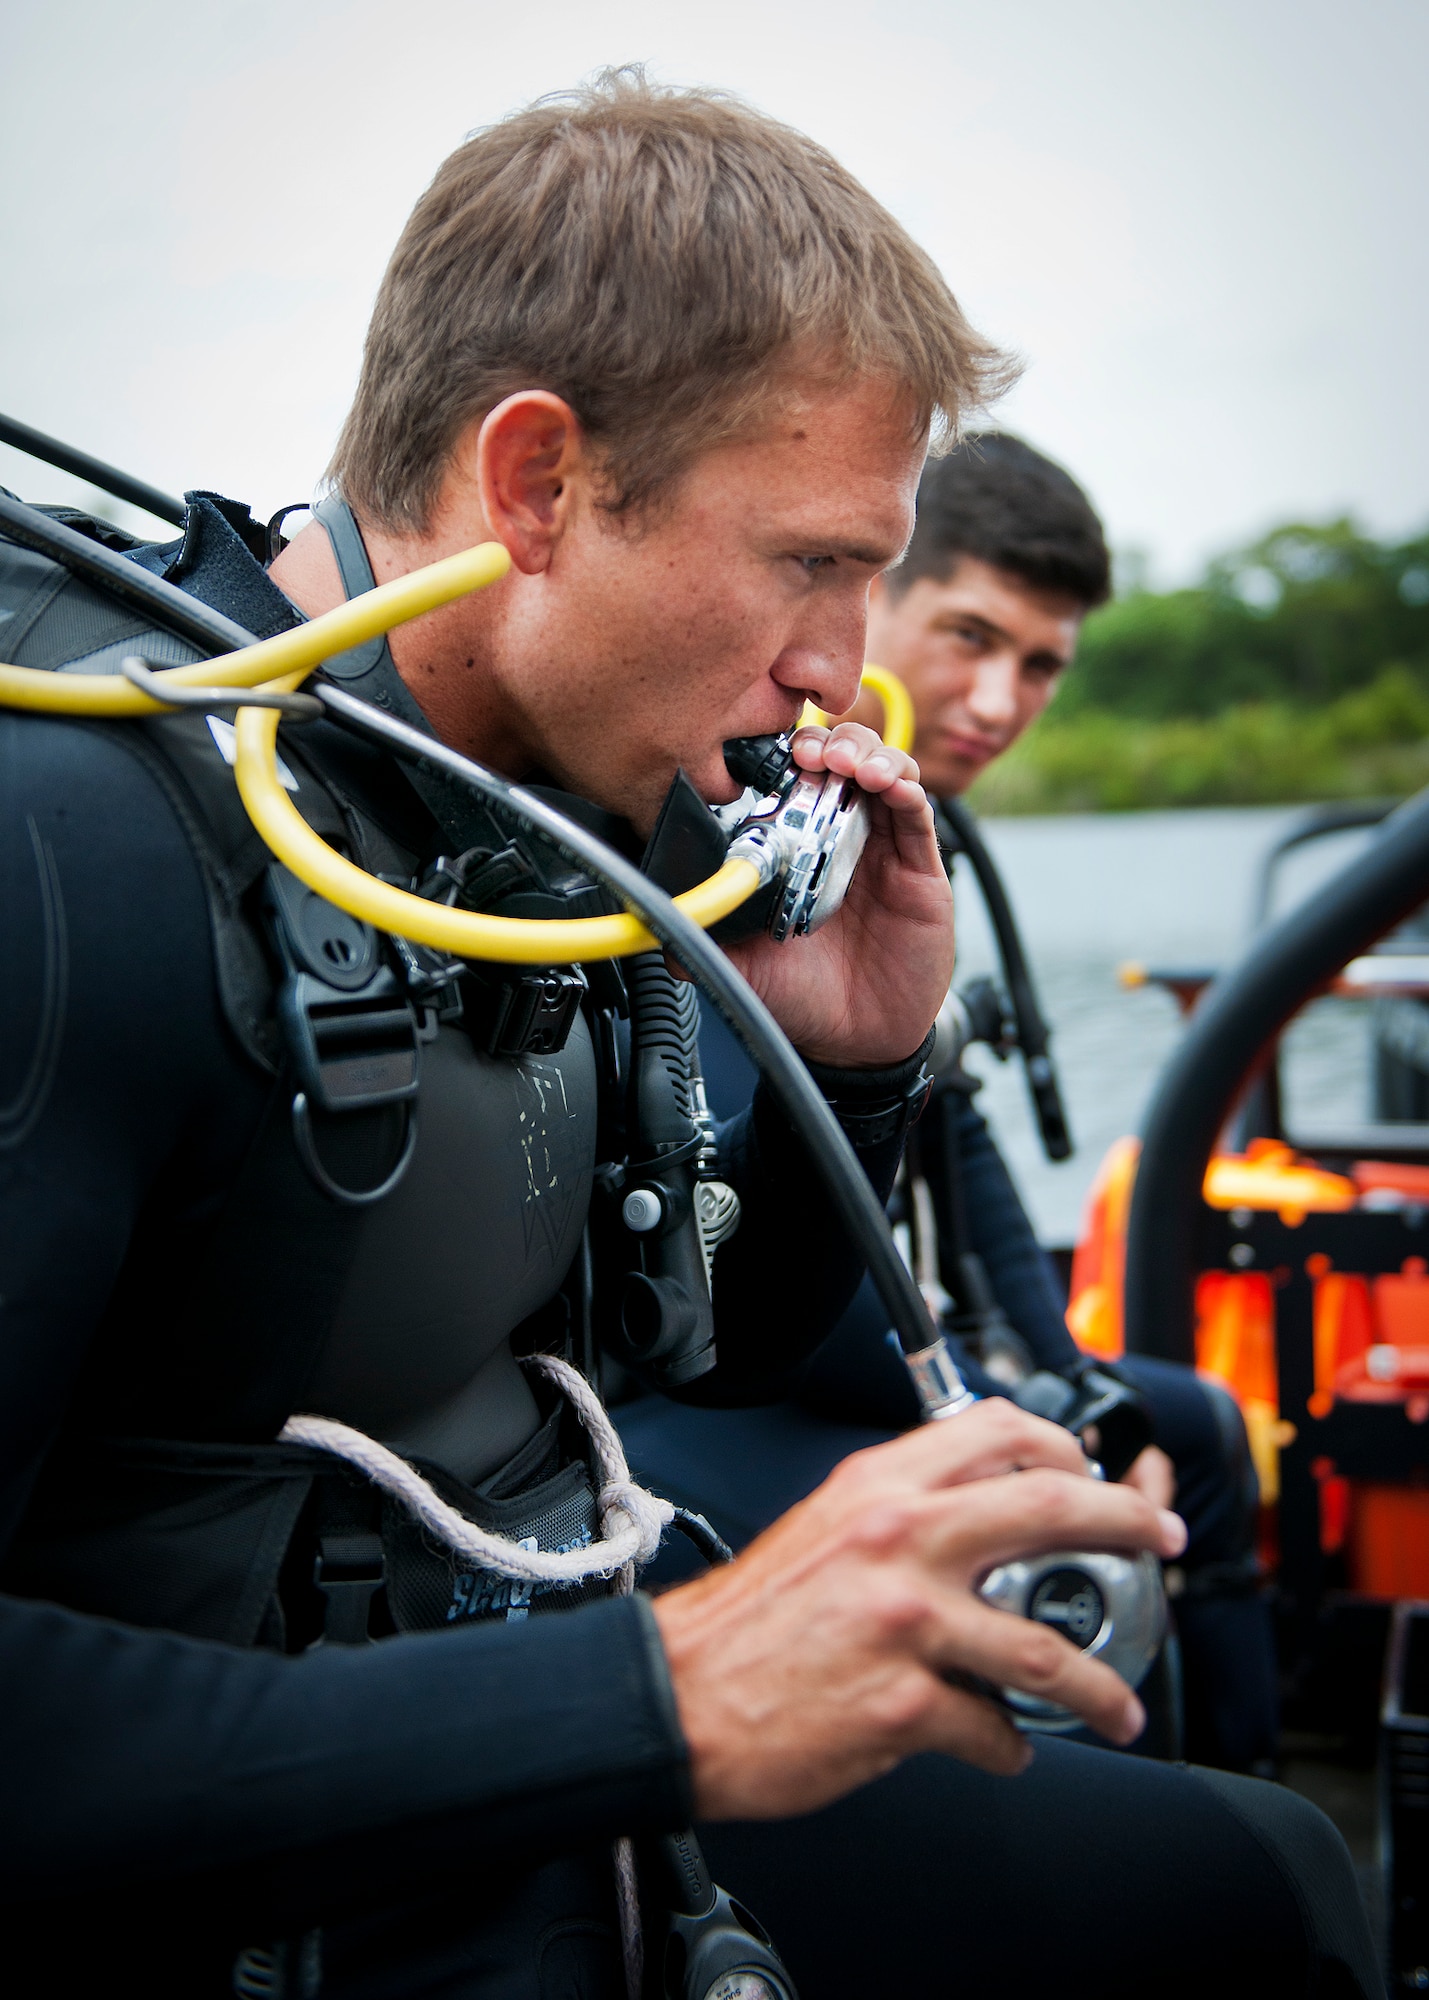 A Navy explosive ordnance disposal student checks his equipment before a diving exercise at Eglin Air Force Base, Fla.  After completing the standard training course at Navy EOD school, Sailors attend the 55-day dive training on Eglin.  The Naval School EOD staff trains approximately 1,800 DOD military, civilian and international students annually.  (U.S. Air Force photo/Tech. Sgt. Samuel King Jr.)